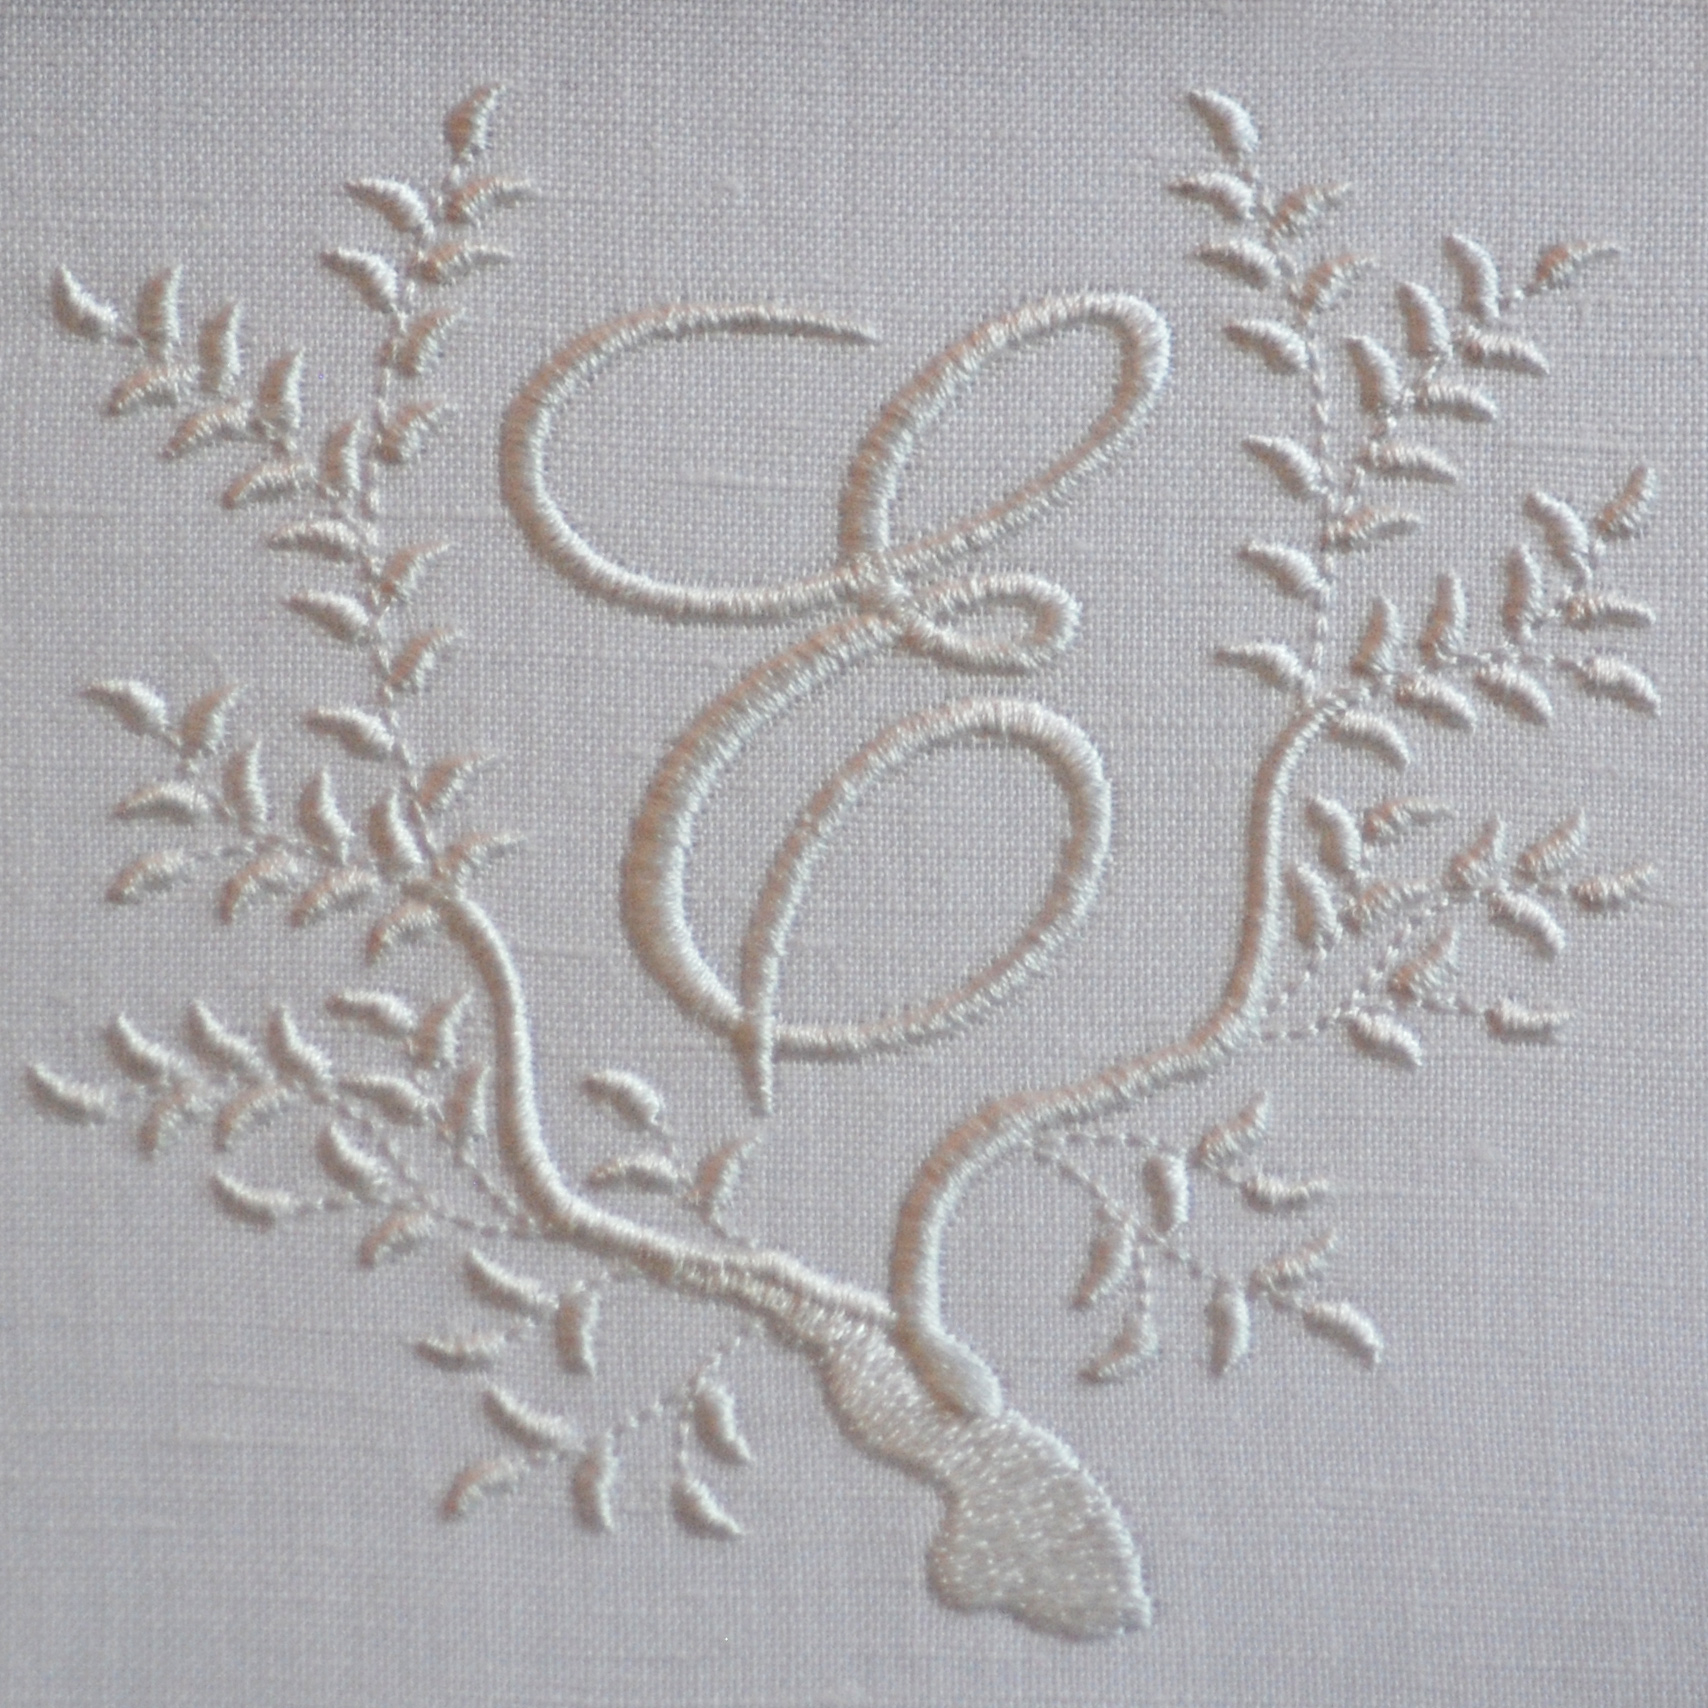 Monogram Patterns For Embroidery Tree Of Life Monogram Blank